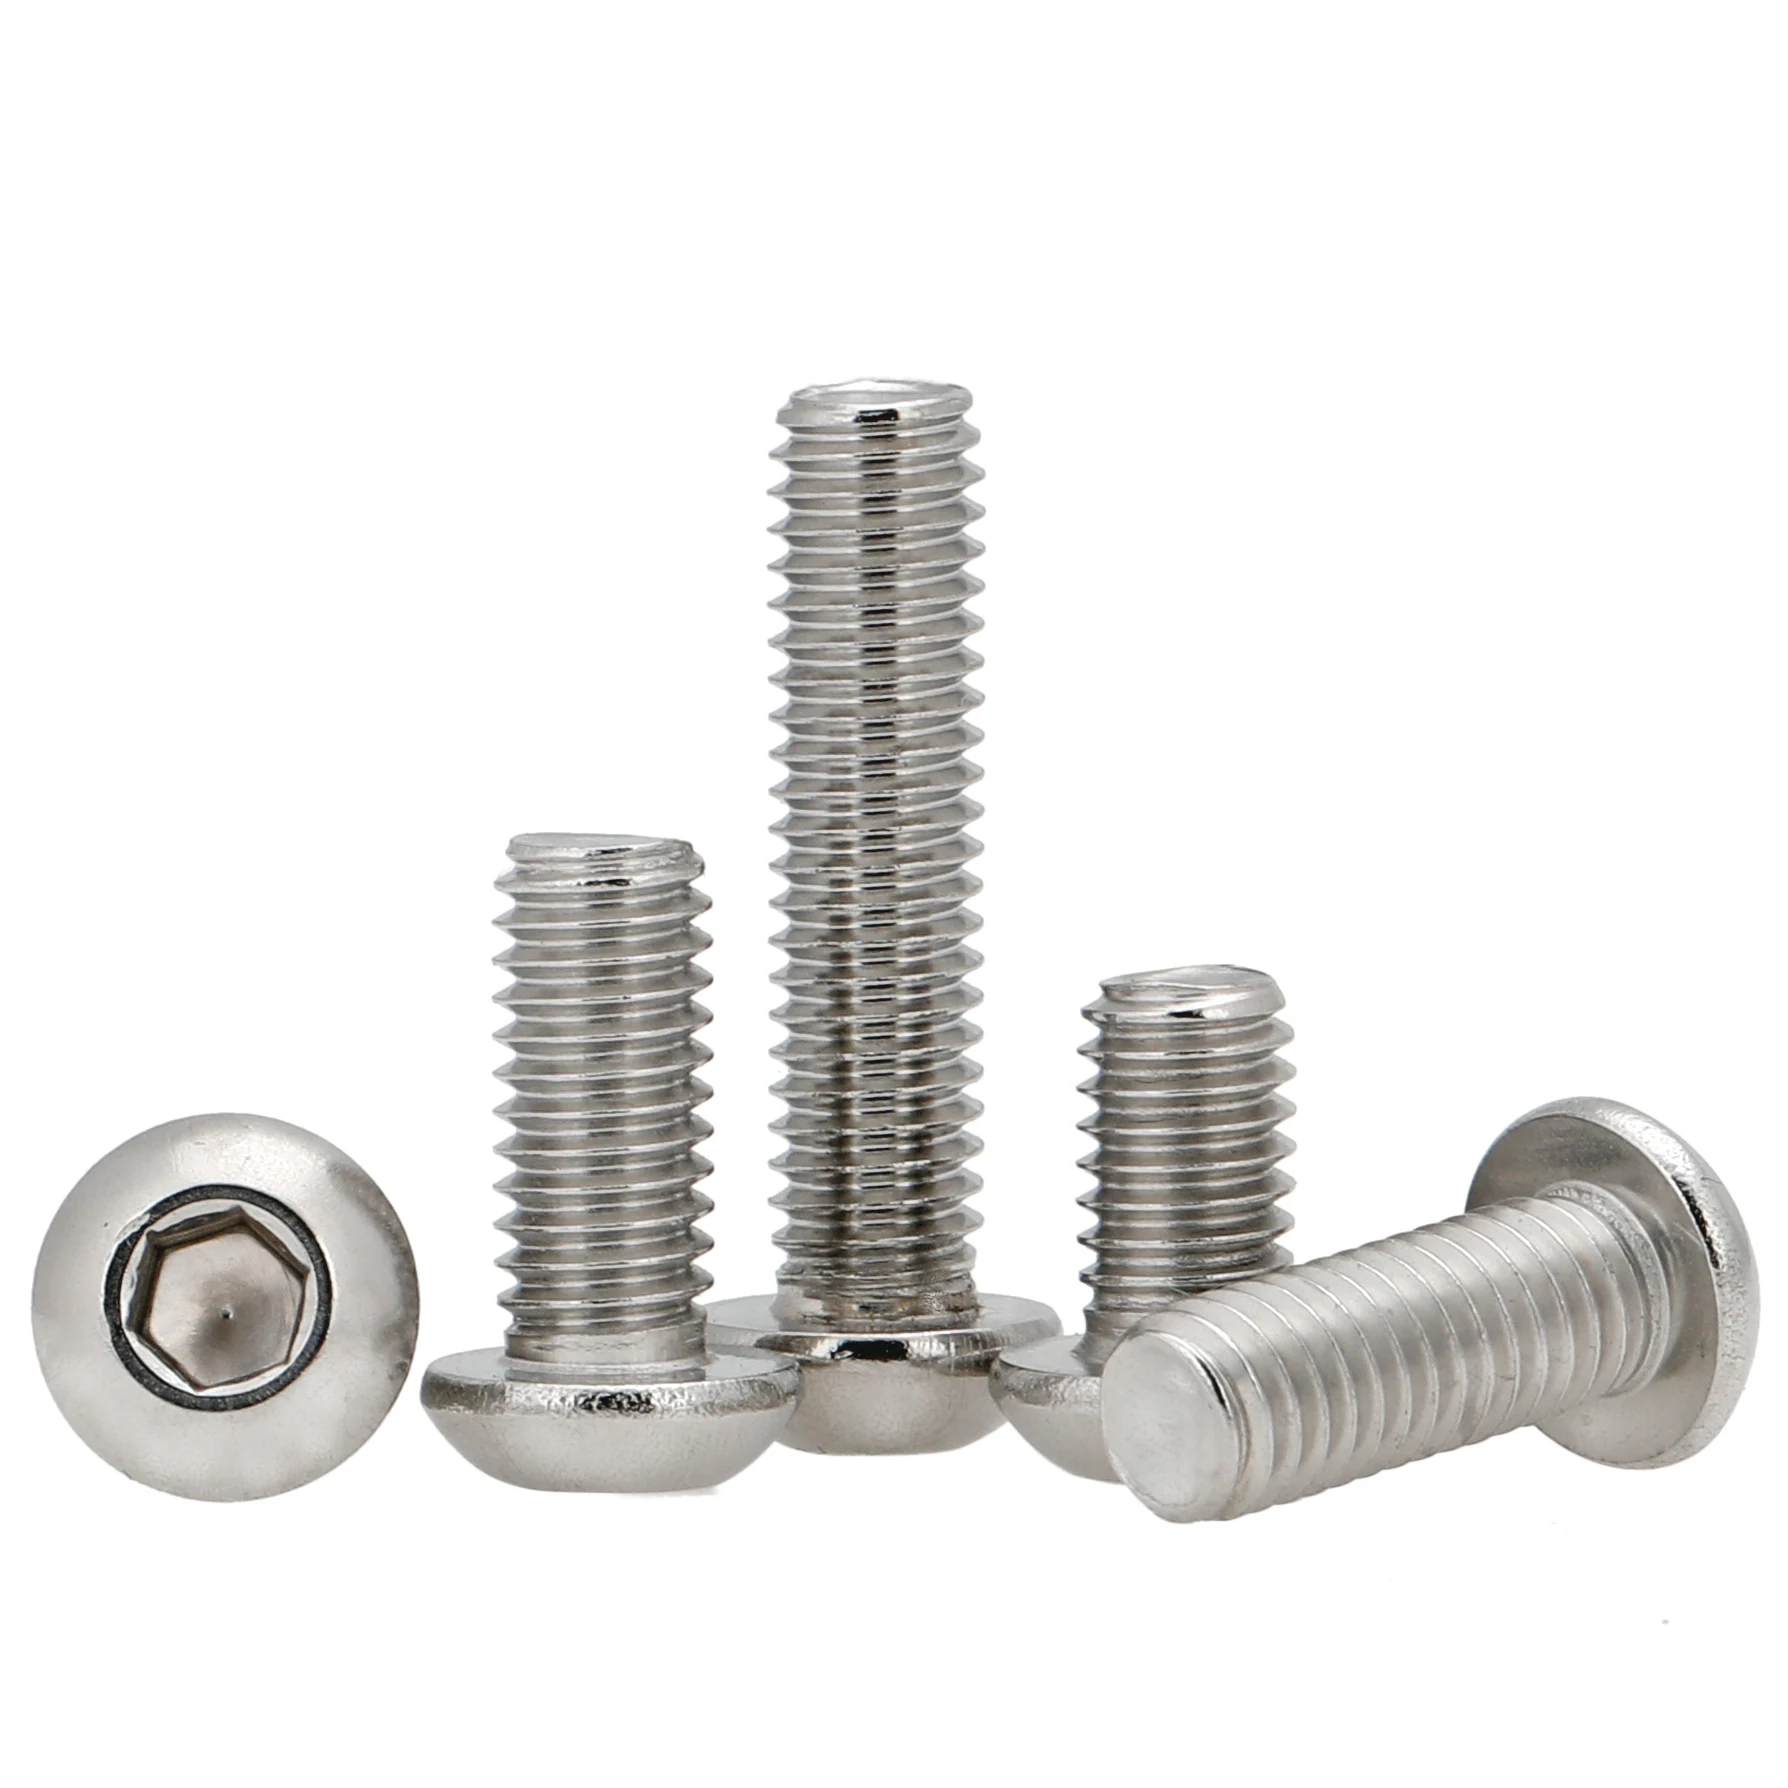 316 Stainless Steel ISO7380 Hex Socket Bolt Button Head Screw M3 M4 M5 M6 M8 M10 